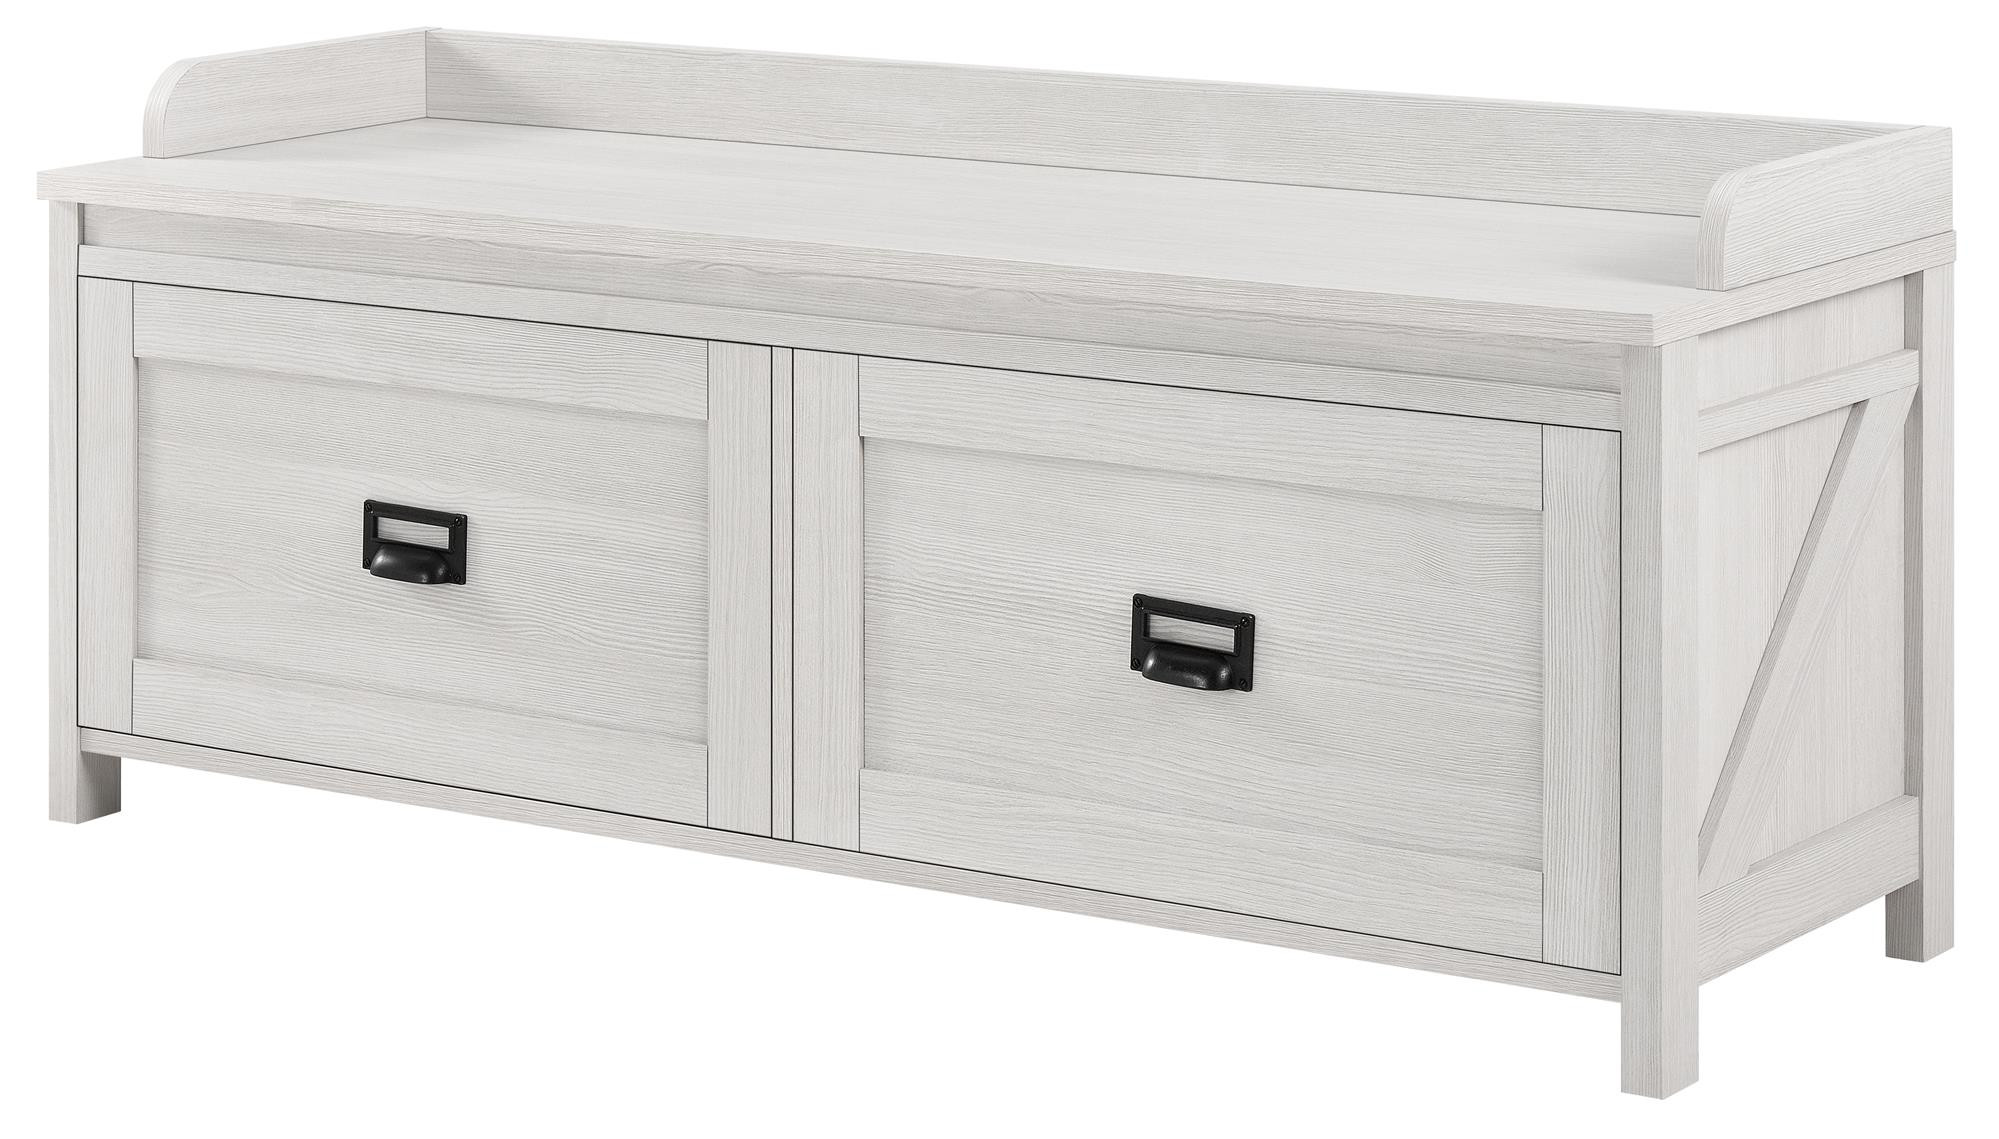 White Storage Bench With Drawers
 White Entryway Storage Bench Farmhouse Rustic Barn Wood